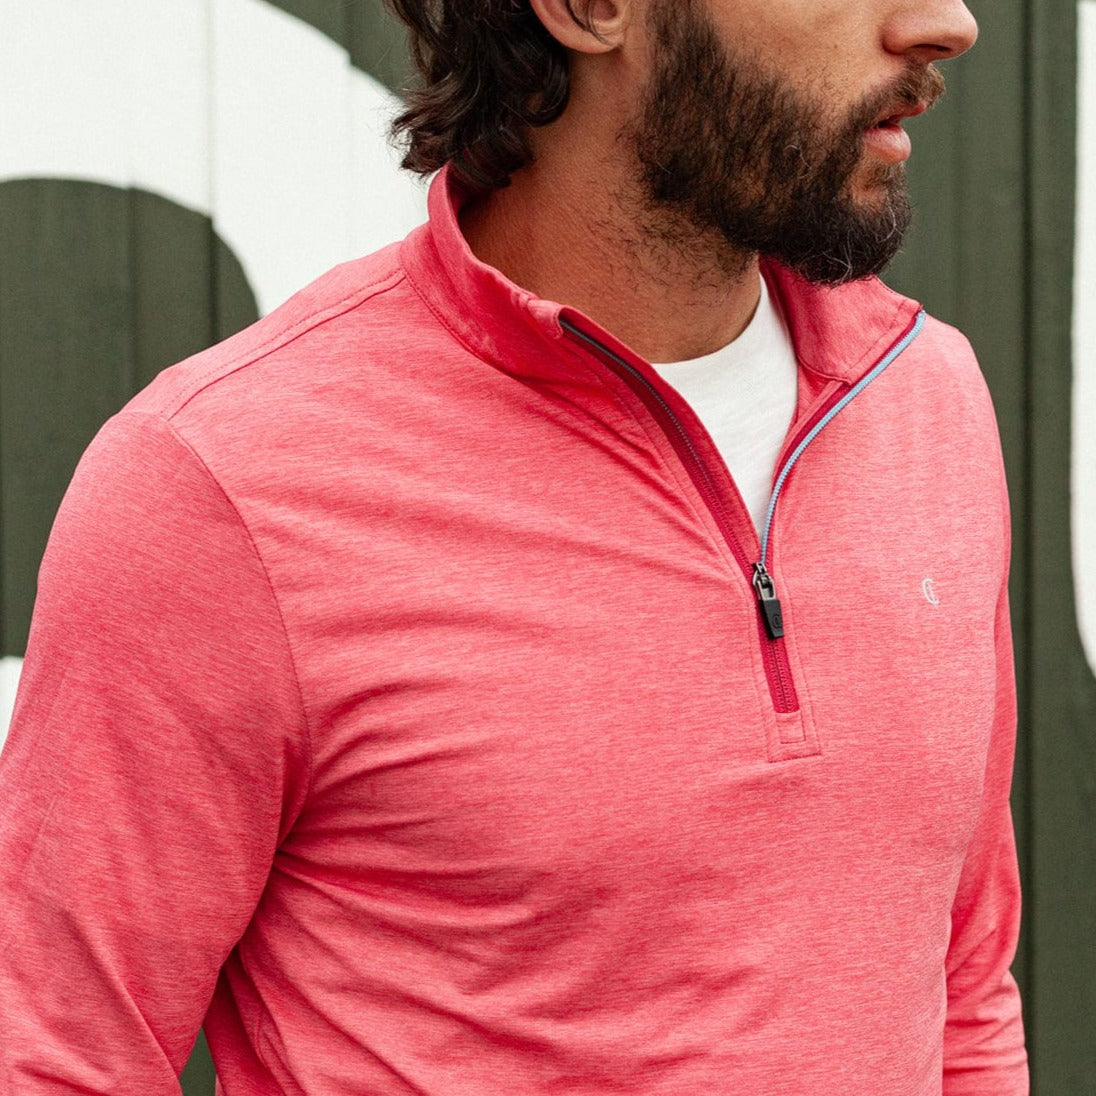 Criquet Feather Performance Pullover